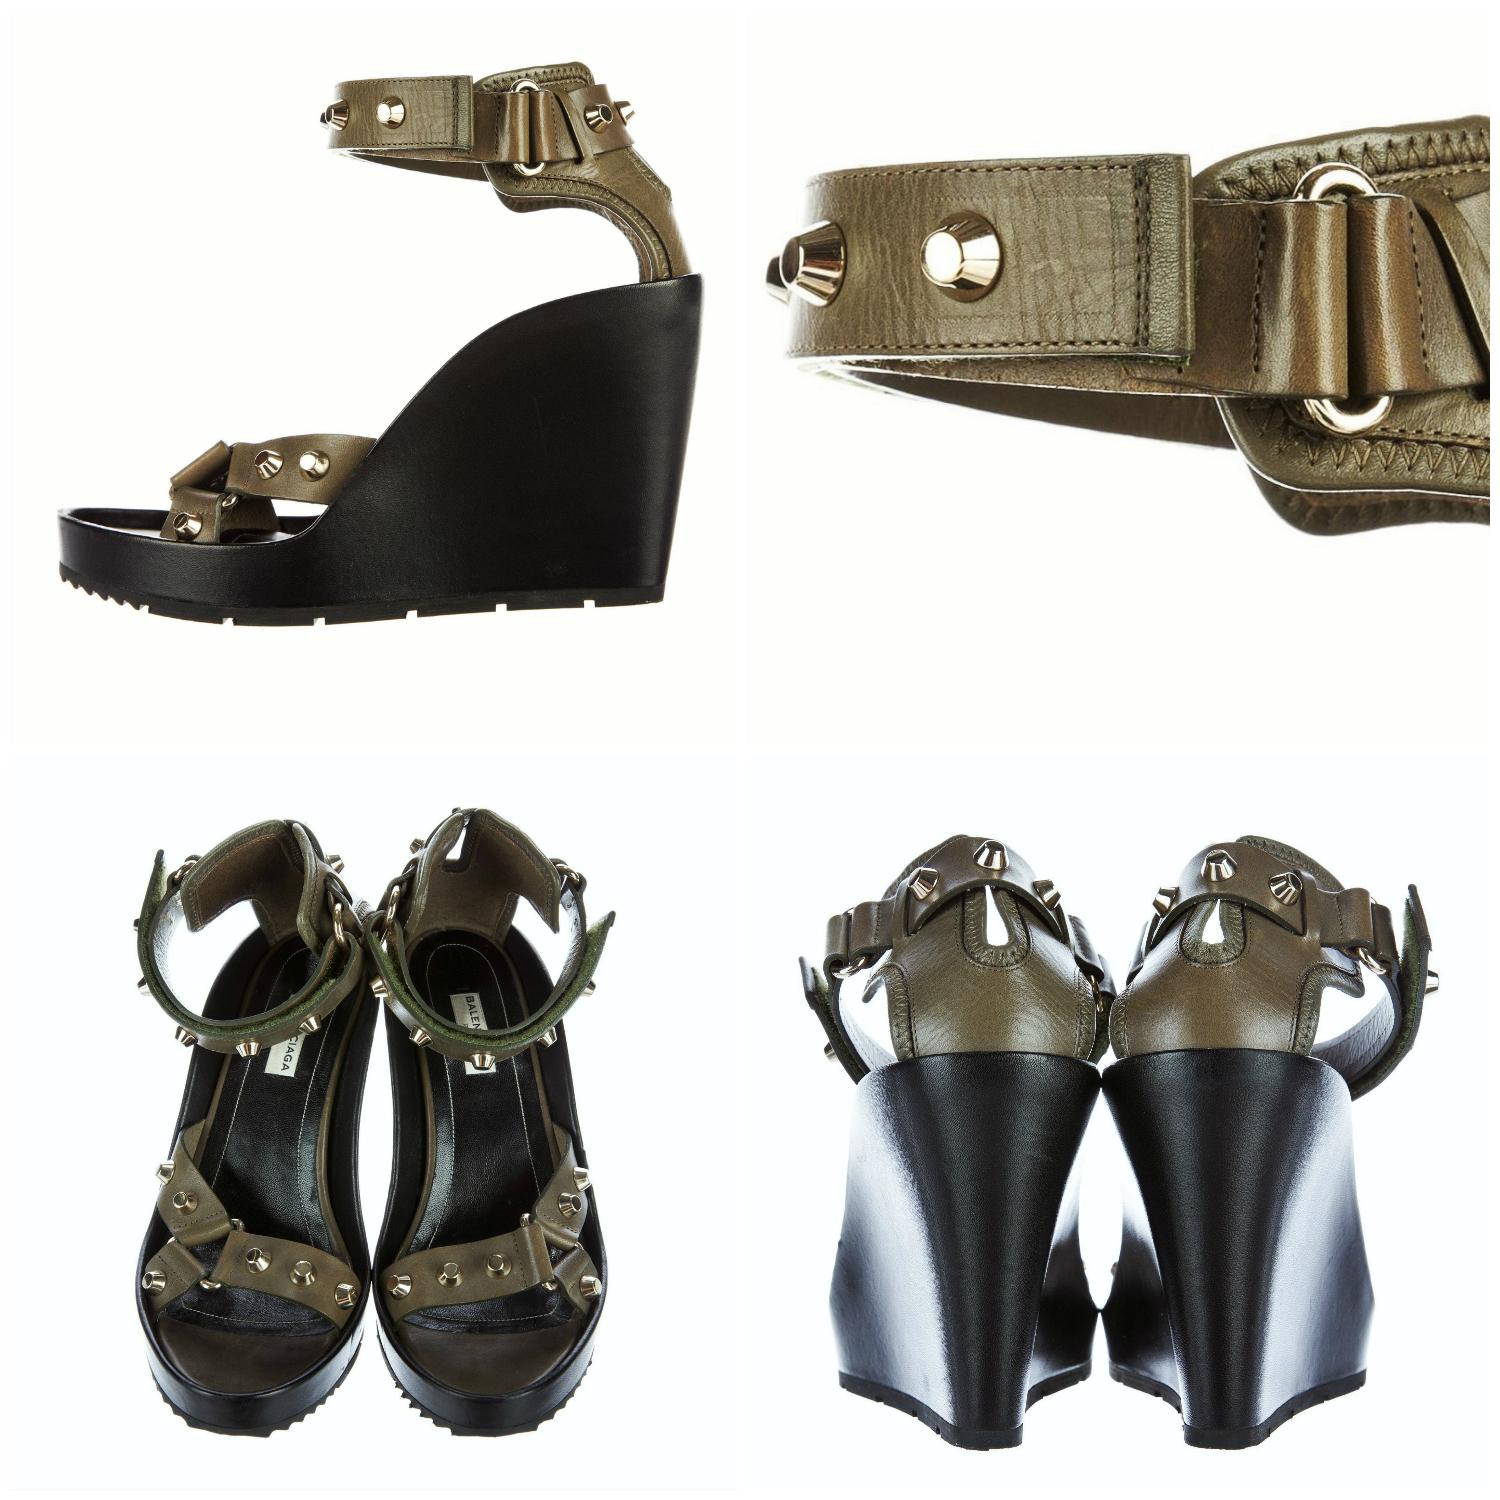 Balenciaga Wedge Platforms
Brand New
* Stunning in Olive & Black
* Size: 37.5
* Adjustable Ankle Strap
* Velcro Closure
* Gold Studs
* 1.25